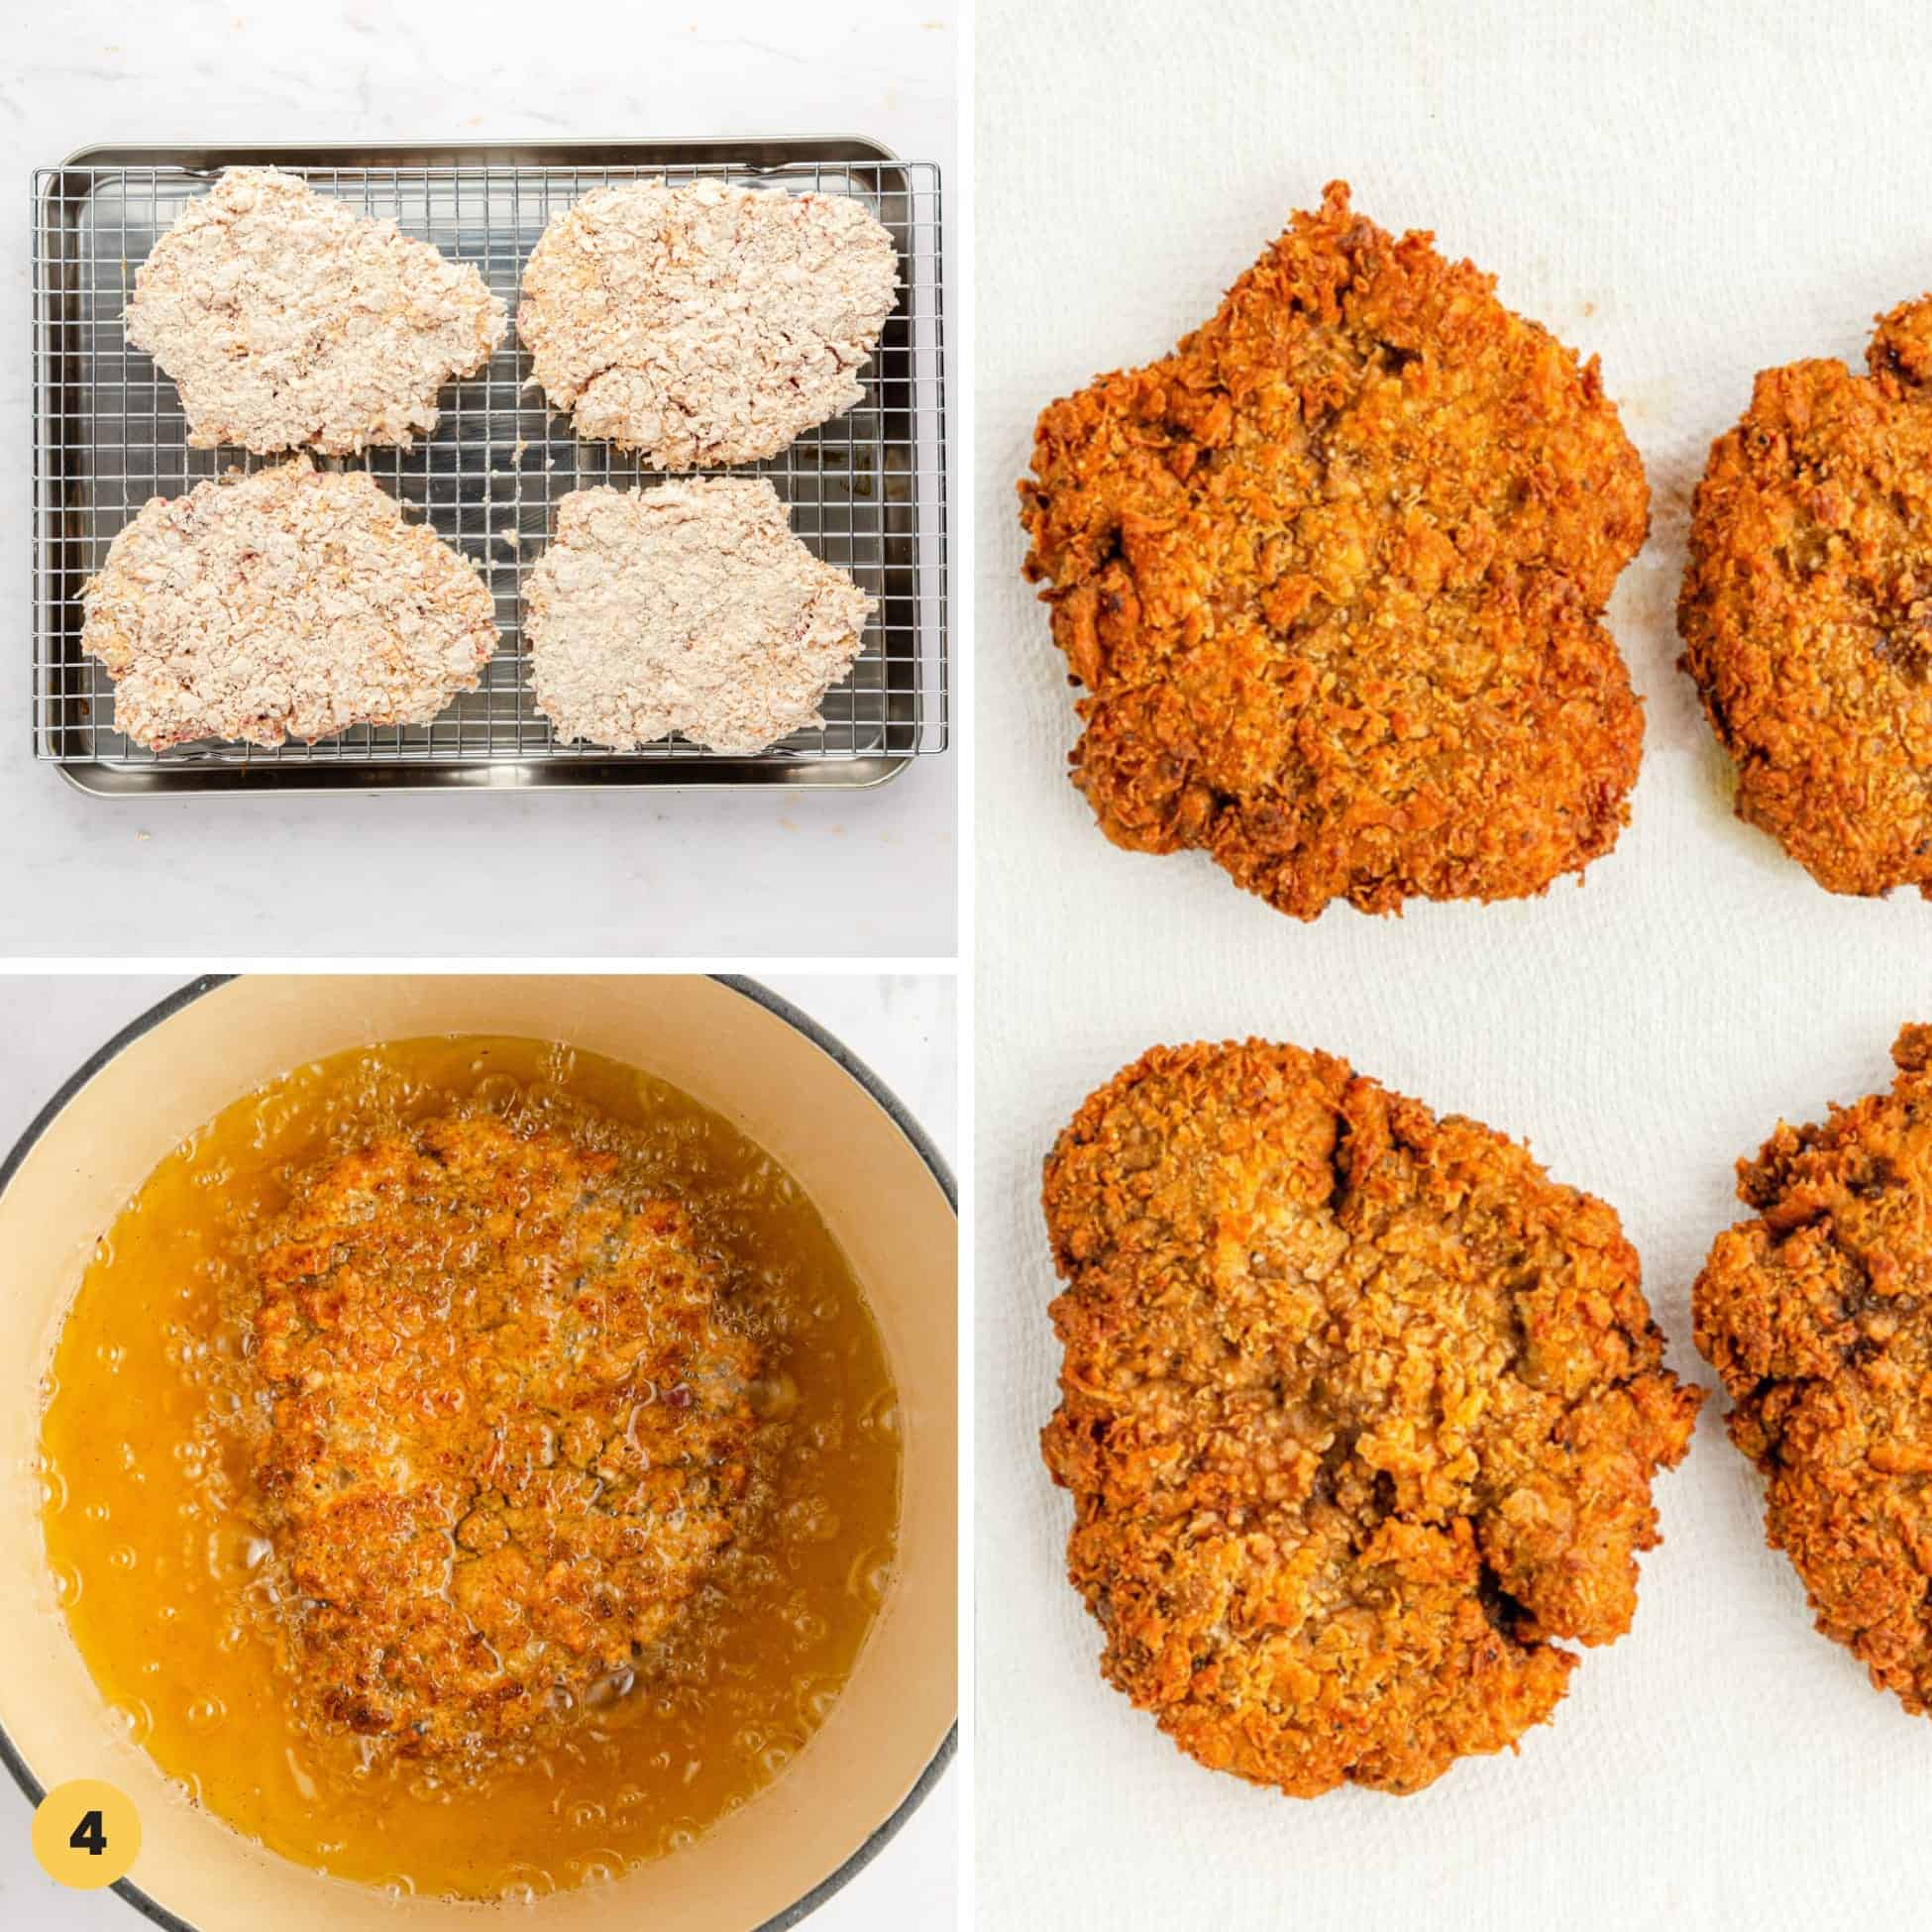 Collage of 3 images to show how to fry cube steak to make chicken fried steak